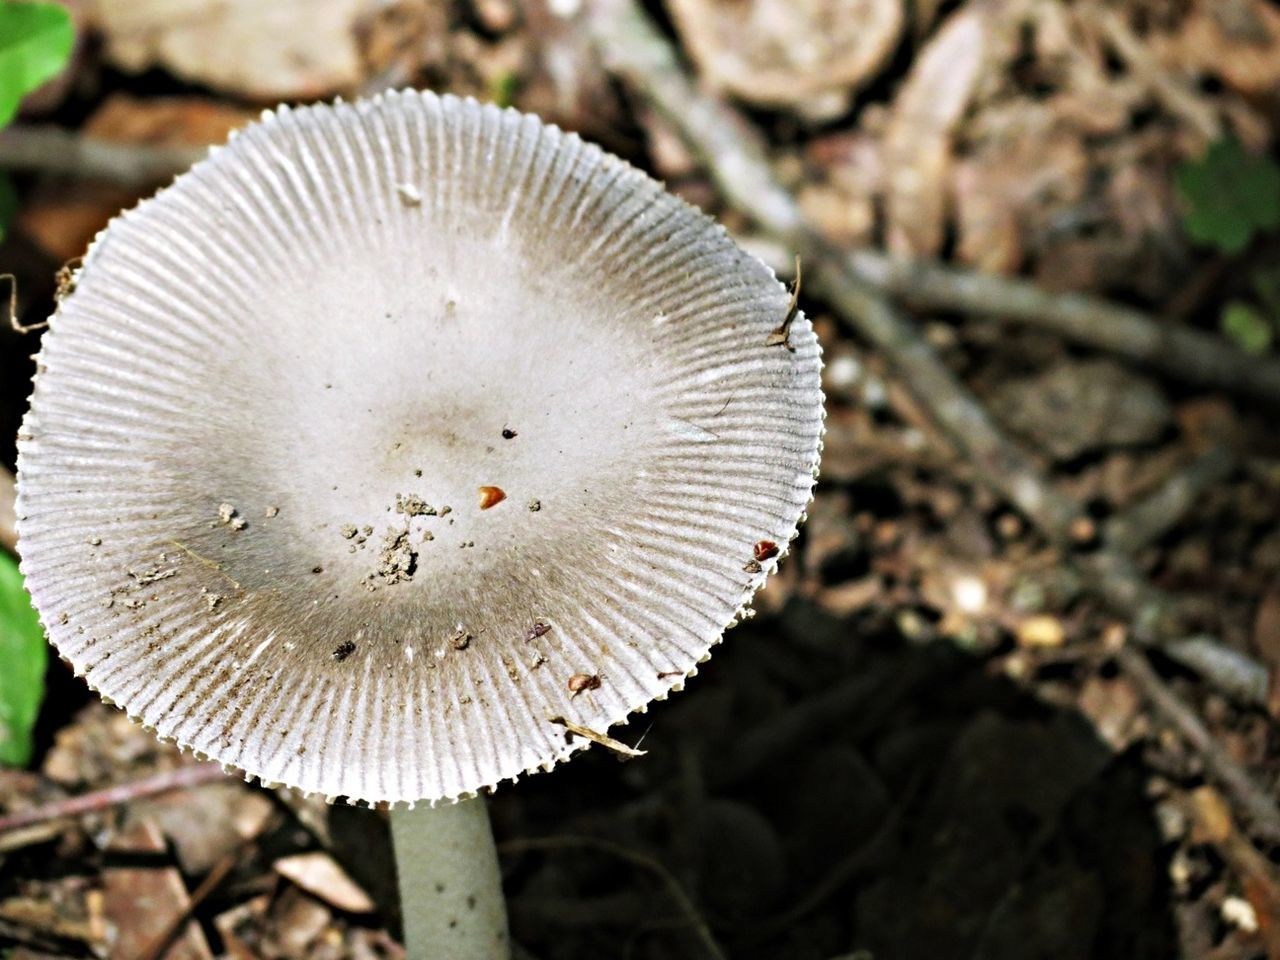 mushroom, fungus, close-up, growth, nature, toadstool, fragility, focus on foreground, white color, uncultivated, beauty in nature, day, forest, dandelion, outdoors, natural pattern, no people, field, single flower, selective focus